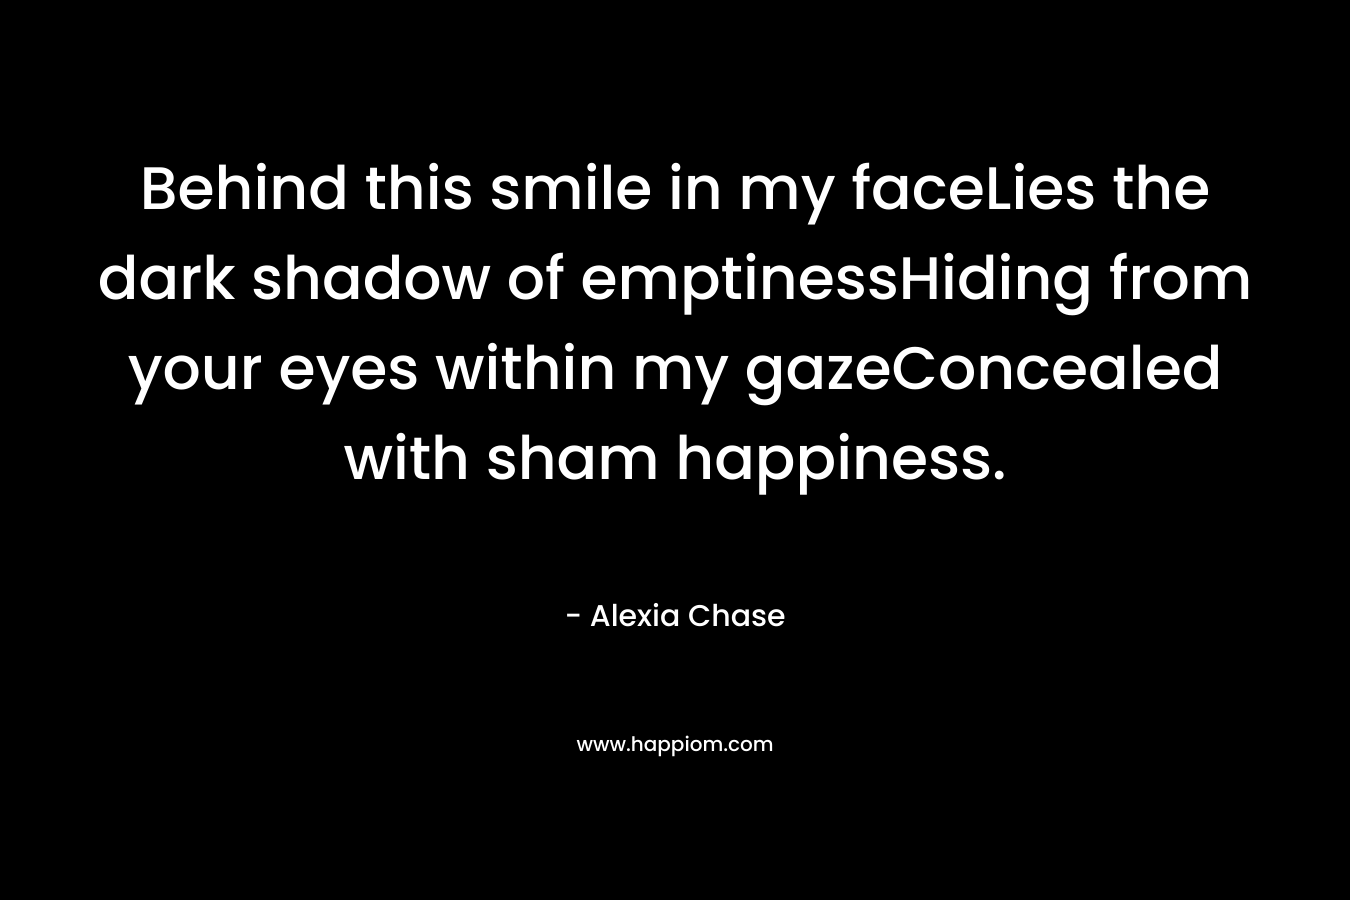 Behind this smile in my faceLies the dark shadow of emptinessHiding from your eyes within my gazeConcealed with sham happiness. – Alexia Chase